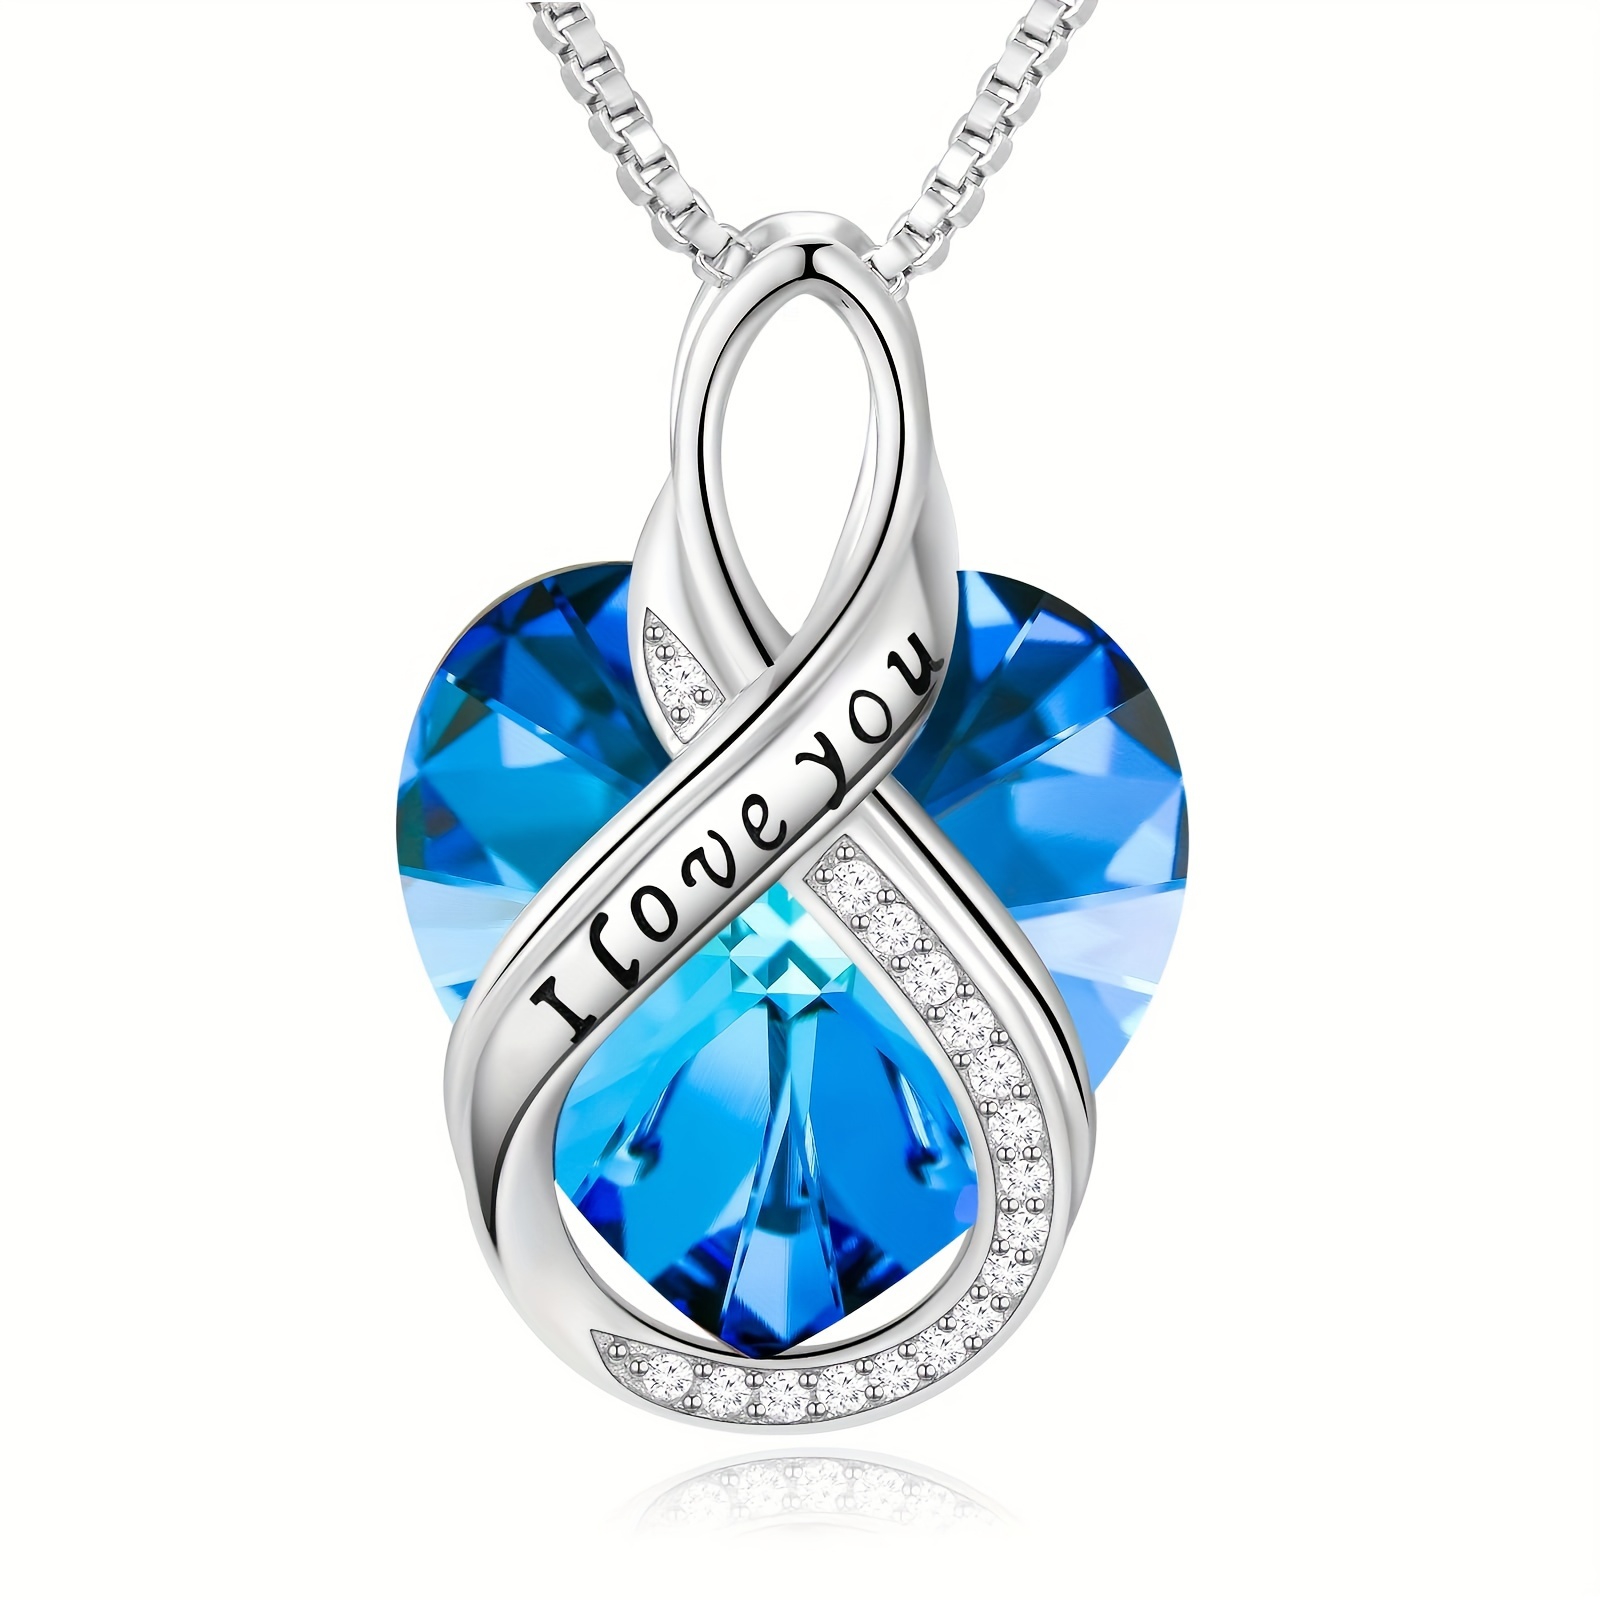 

Sterling 925 Silver Hypoallergenic Necklace Heart Shape Blue Zircon Pendant Necklace Elegant Simple Style Classic Valentine's Day Gift With Gift Box